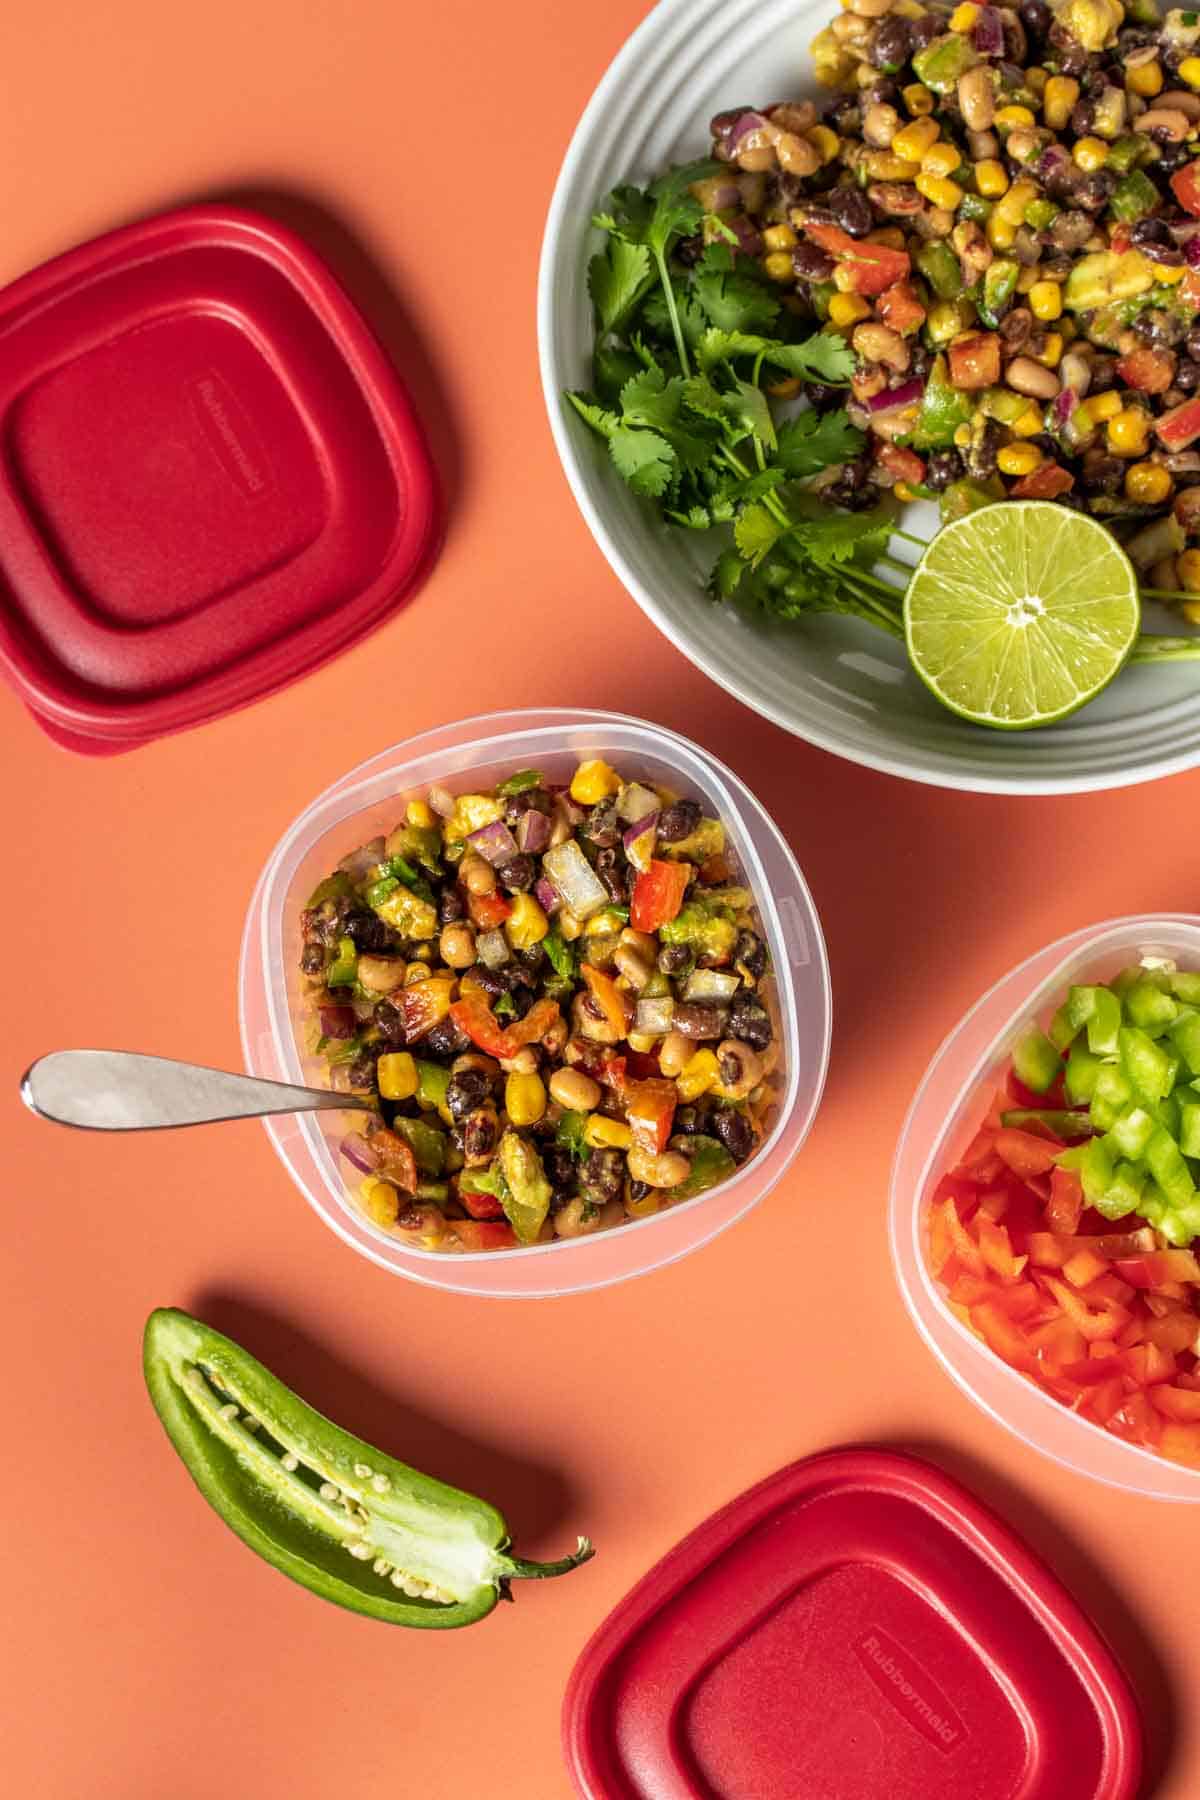 A plastic container with cowboy caviar in it next to a bowl of more salad and a plastic container with chopped peppers.